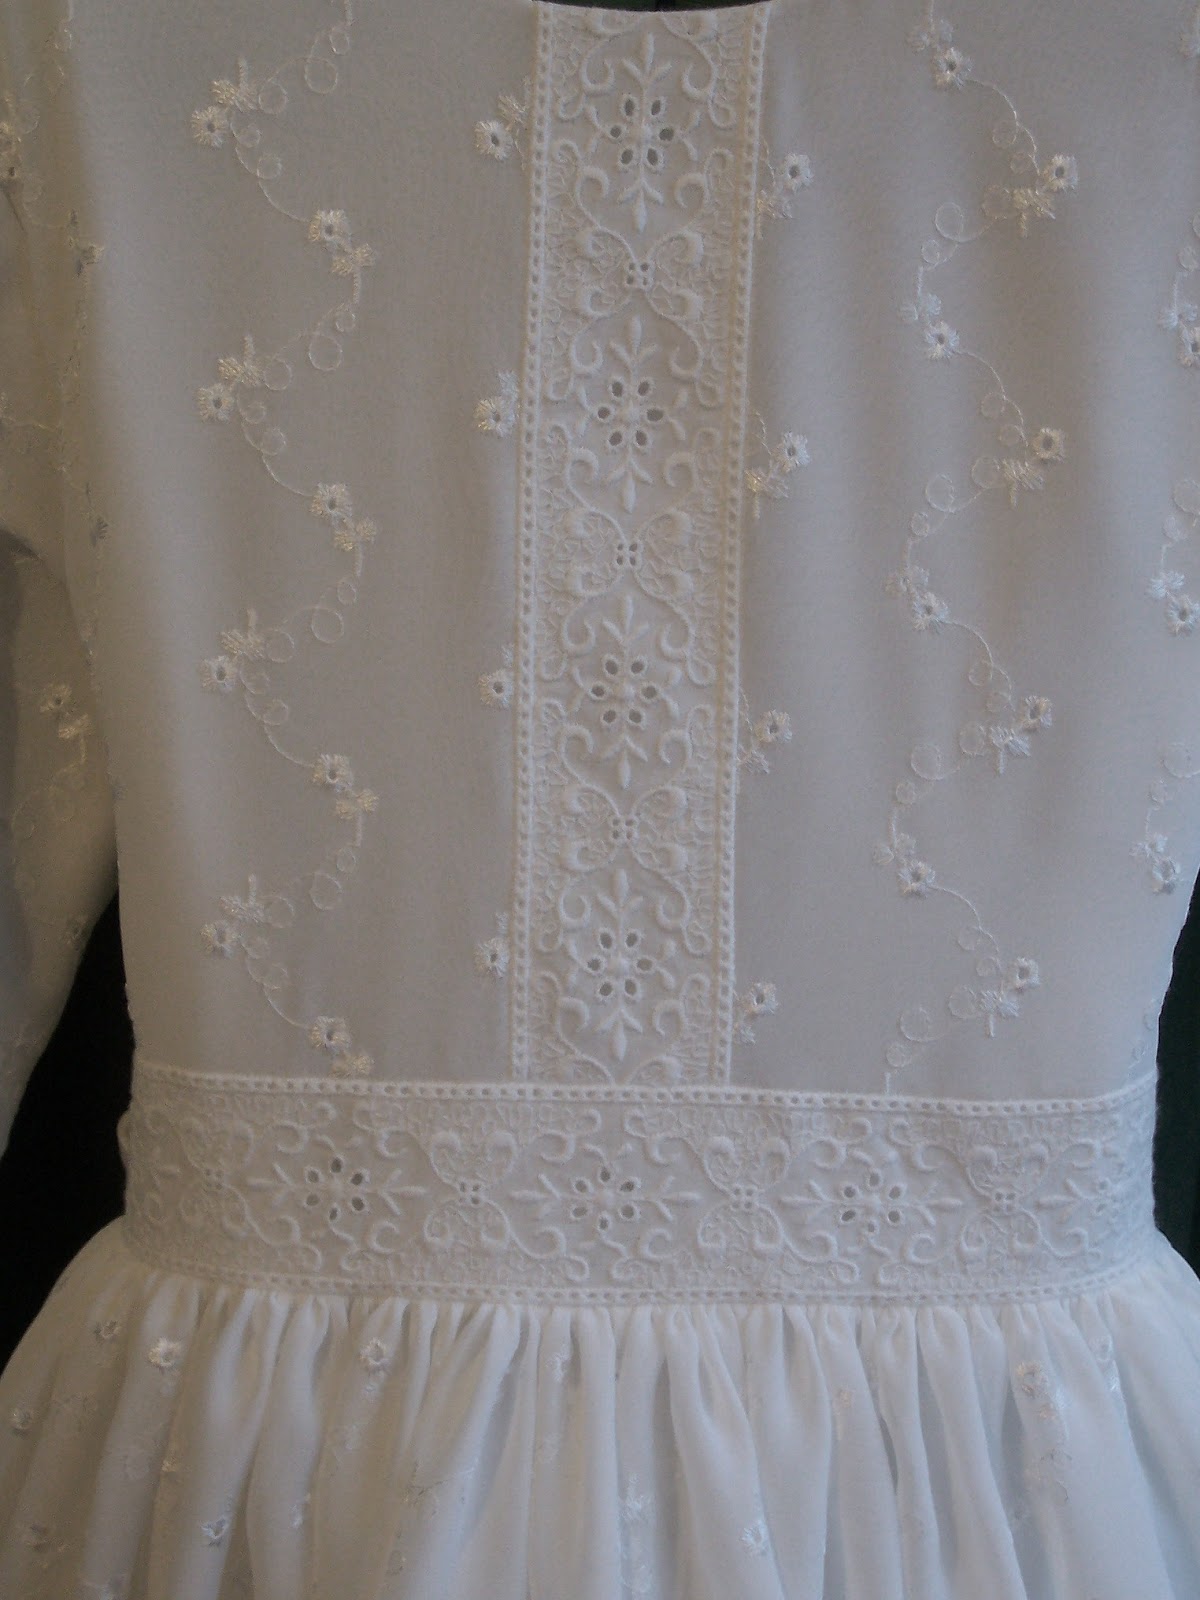 Zelie's Roses : Traditional Long-Sleeved First Holy Communion Dresses